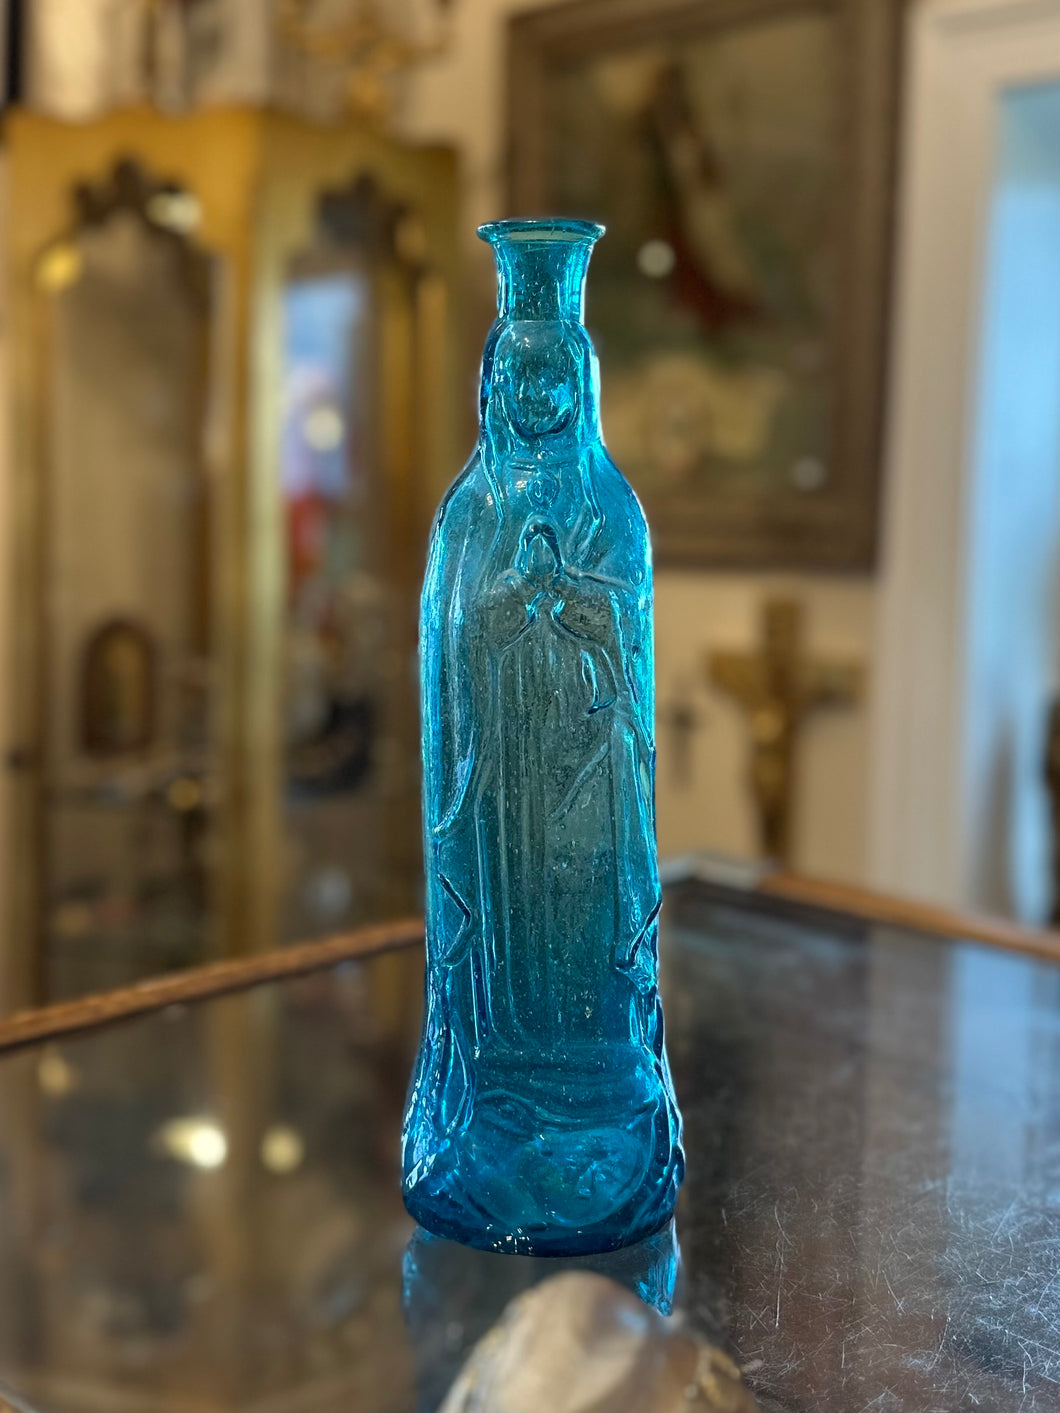 Vintage Handblown Glass Blue Virgin Mary Our Lady of Guadeloupe Bottle Jug with Handle Holy Water Pontil Mark